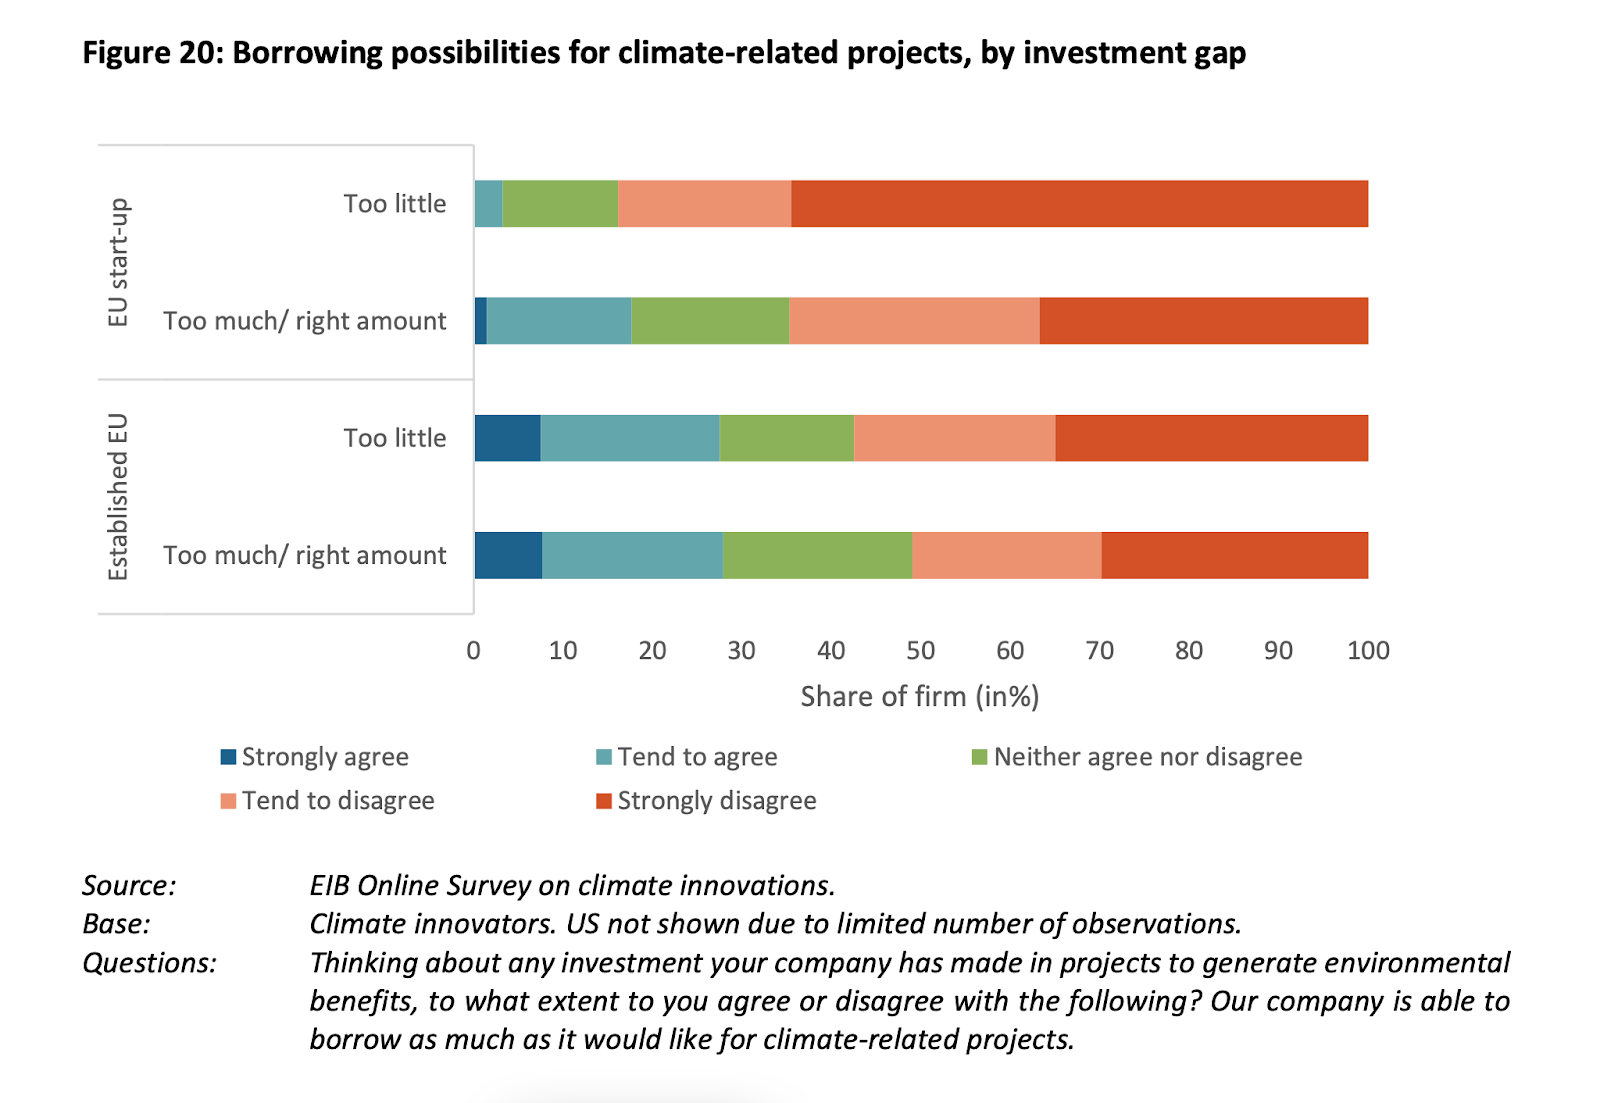 Bar chart with borrowing possibilities for climate-related projects by investment gap in the EU